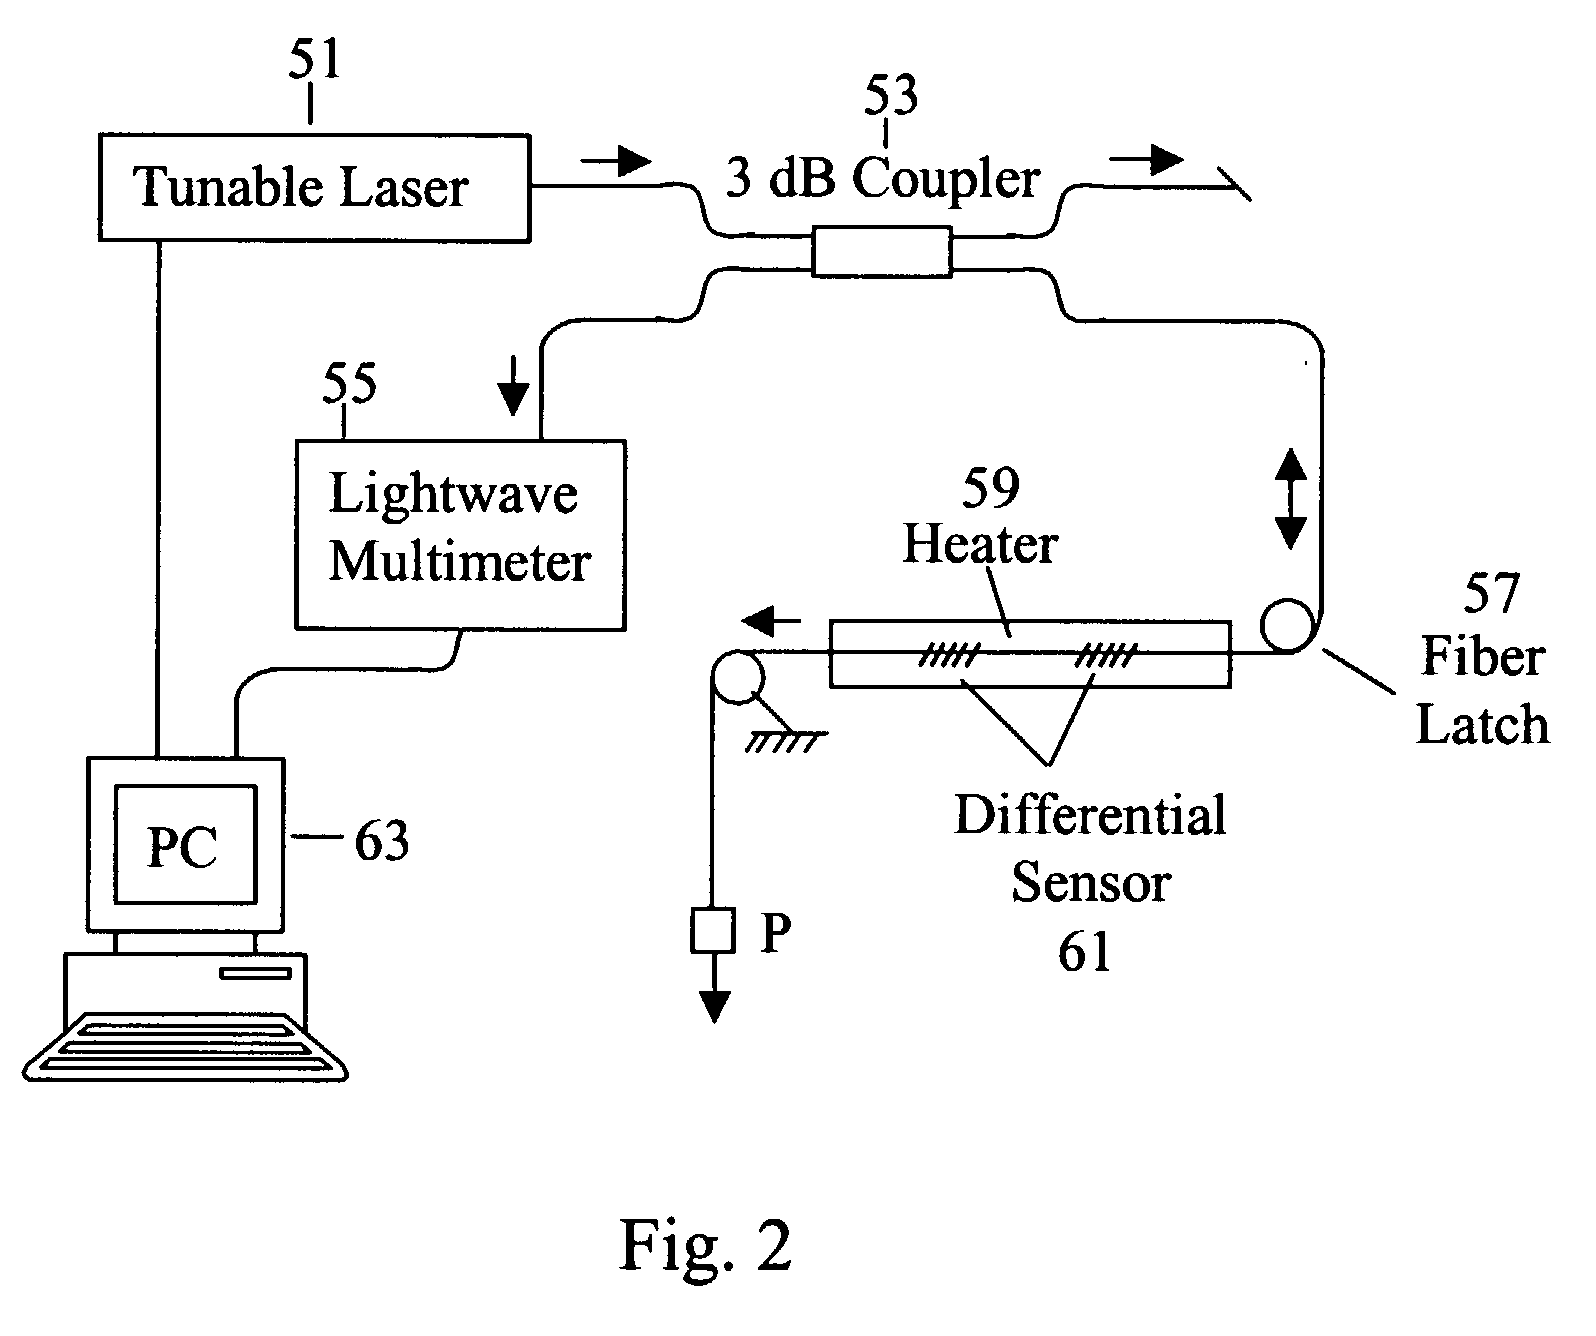 Differential fiber optical sensor with interference energy analyzer